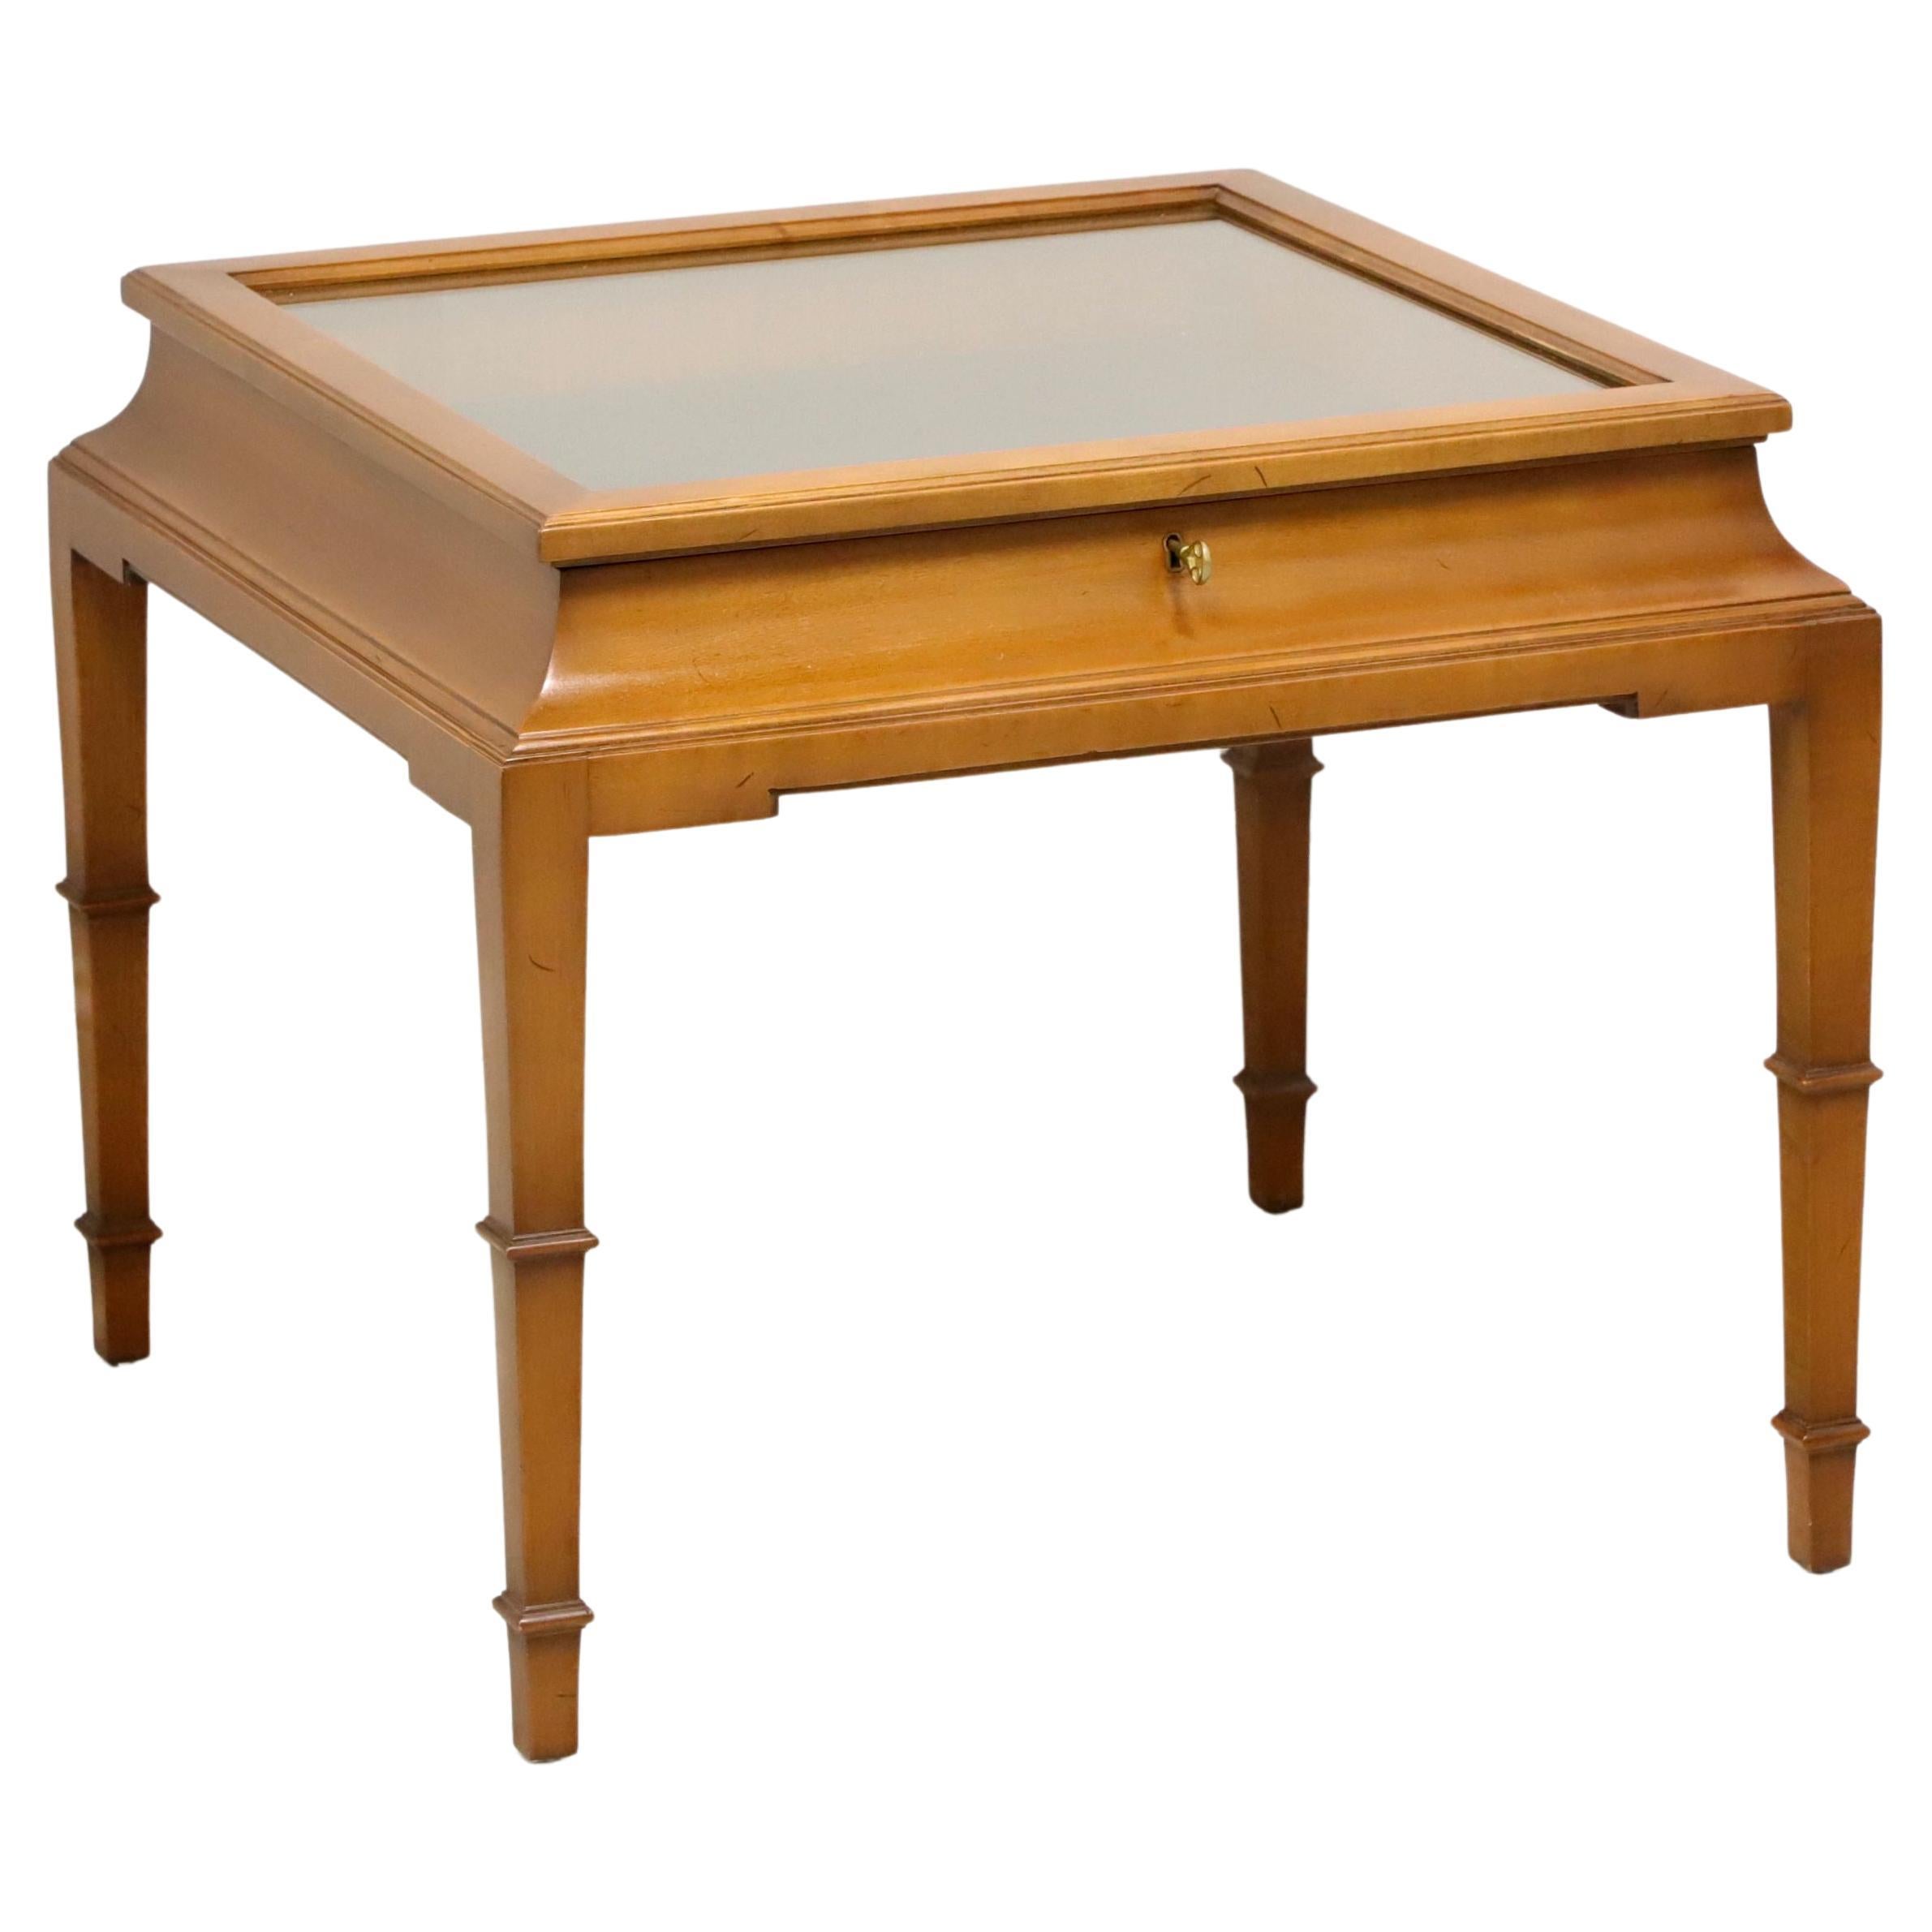 TOMLINSON Nutwood French Louis XVI Square Glass Case Display Accent Table